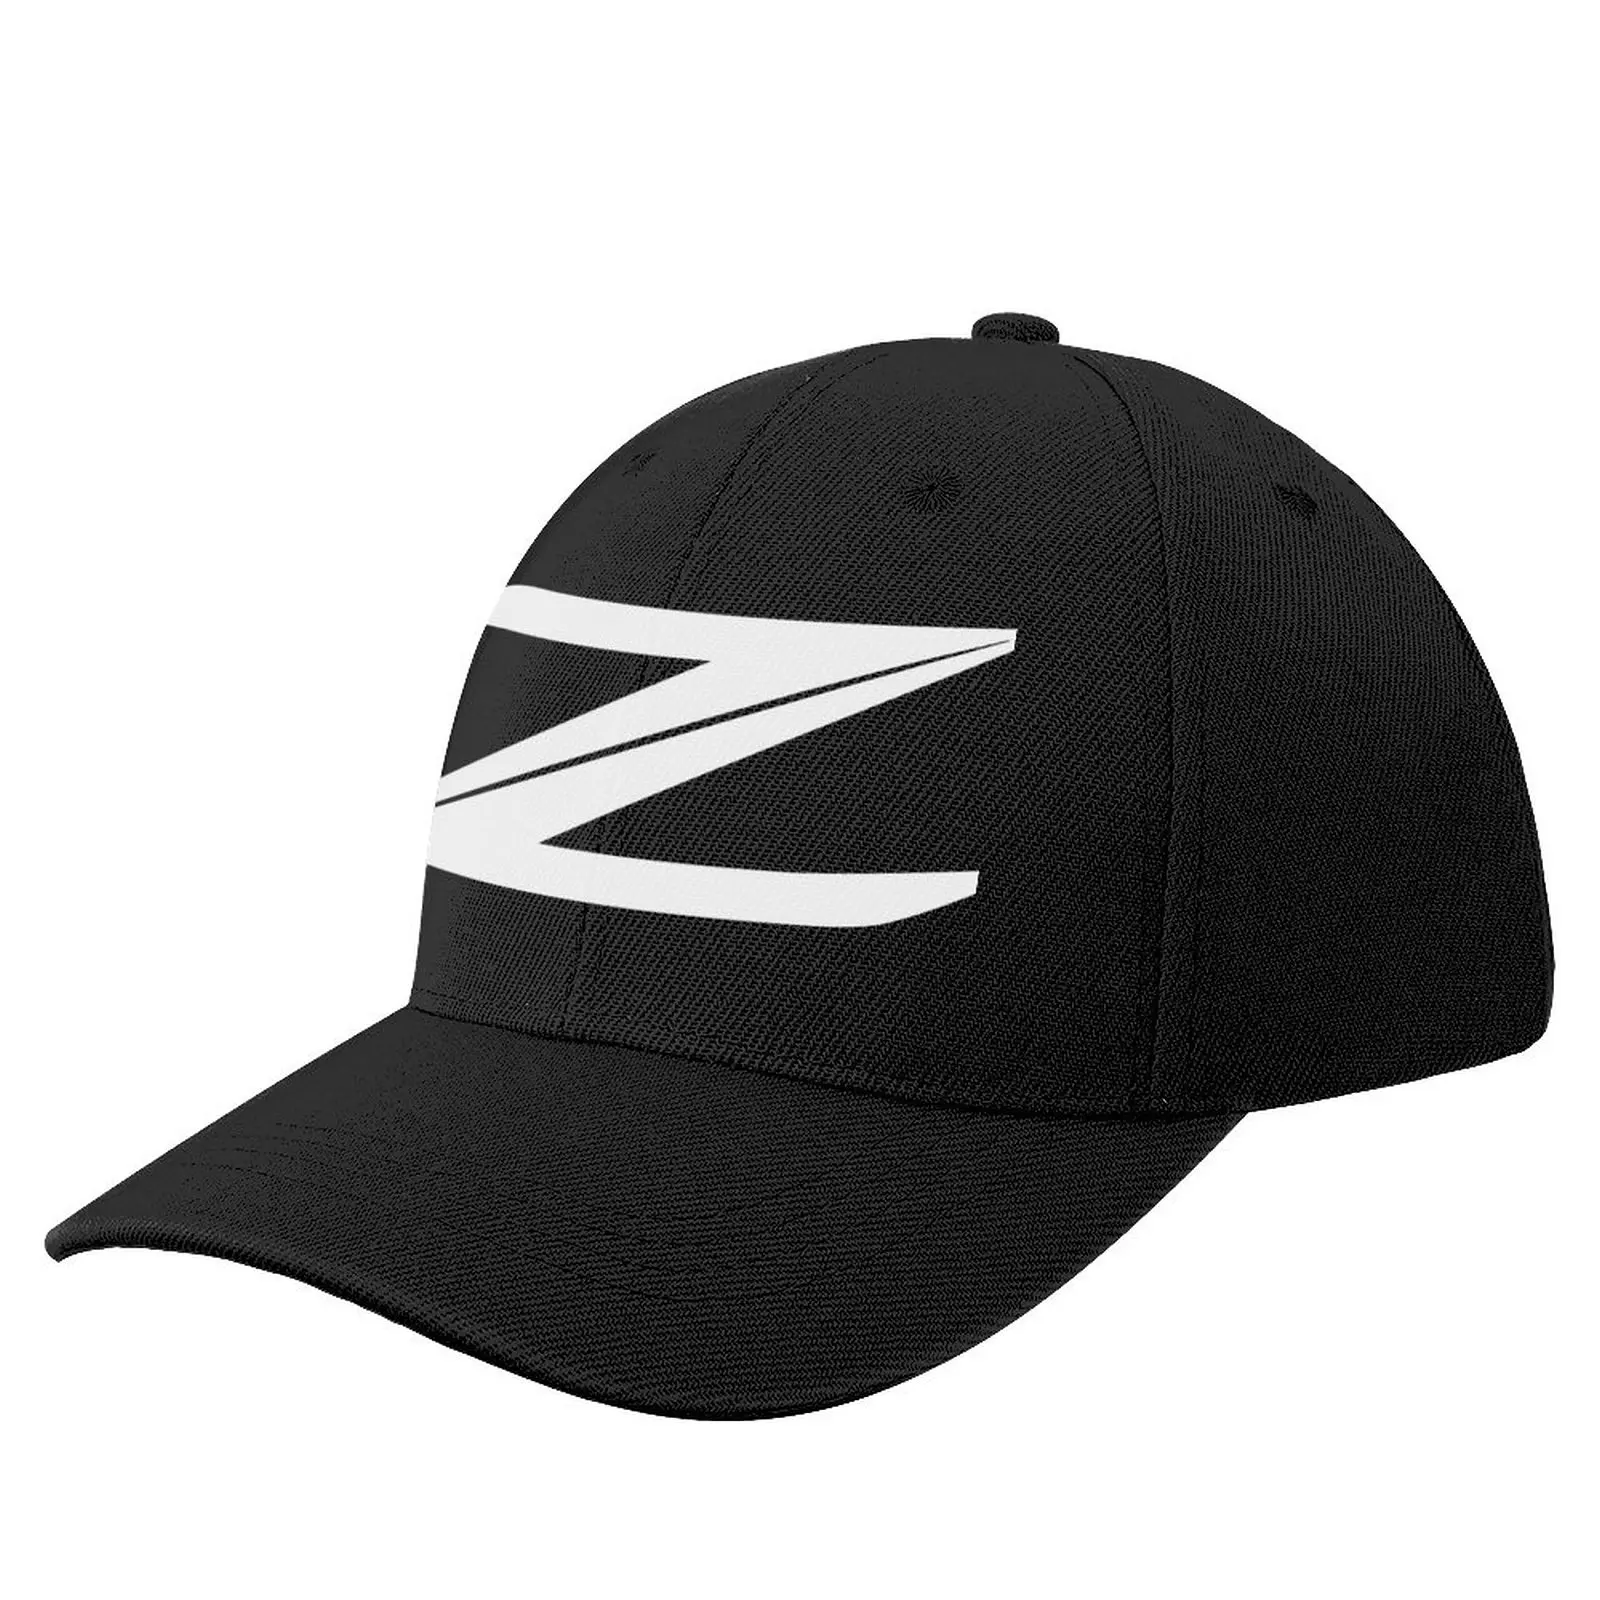 370Z Baseball Cap Golf Hat Man black Hat Ladies Men's 2021 summer new solid color embroidery high quality hat ladies hat brand hat unisex casual sunshade baseball cap